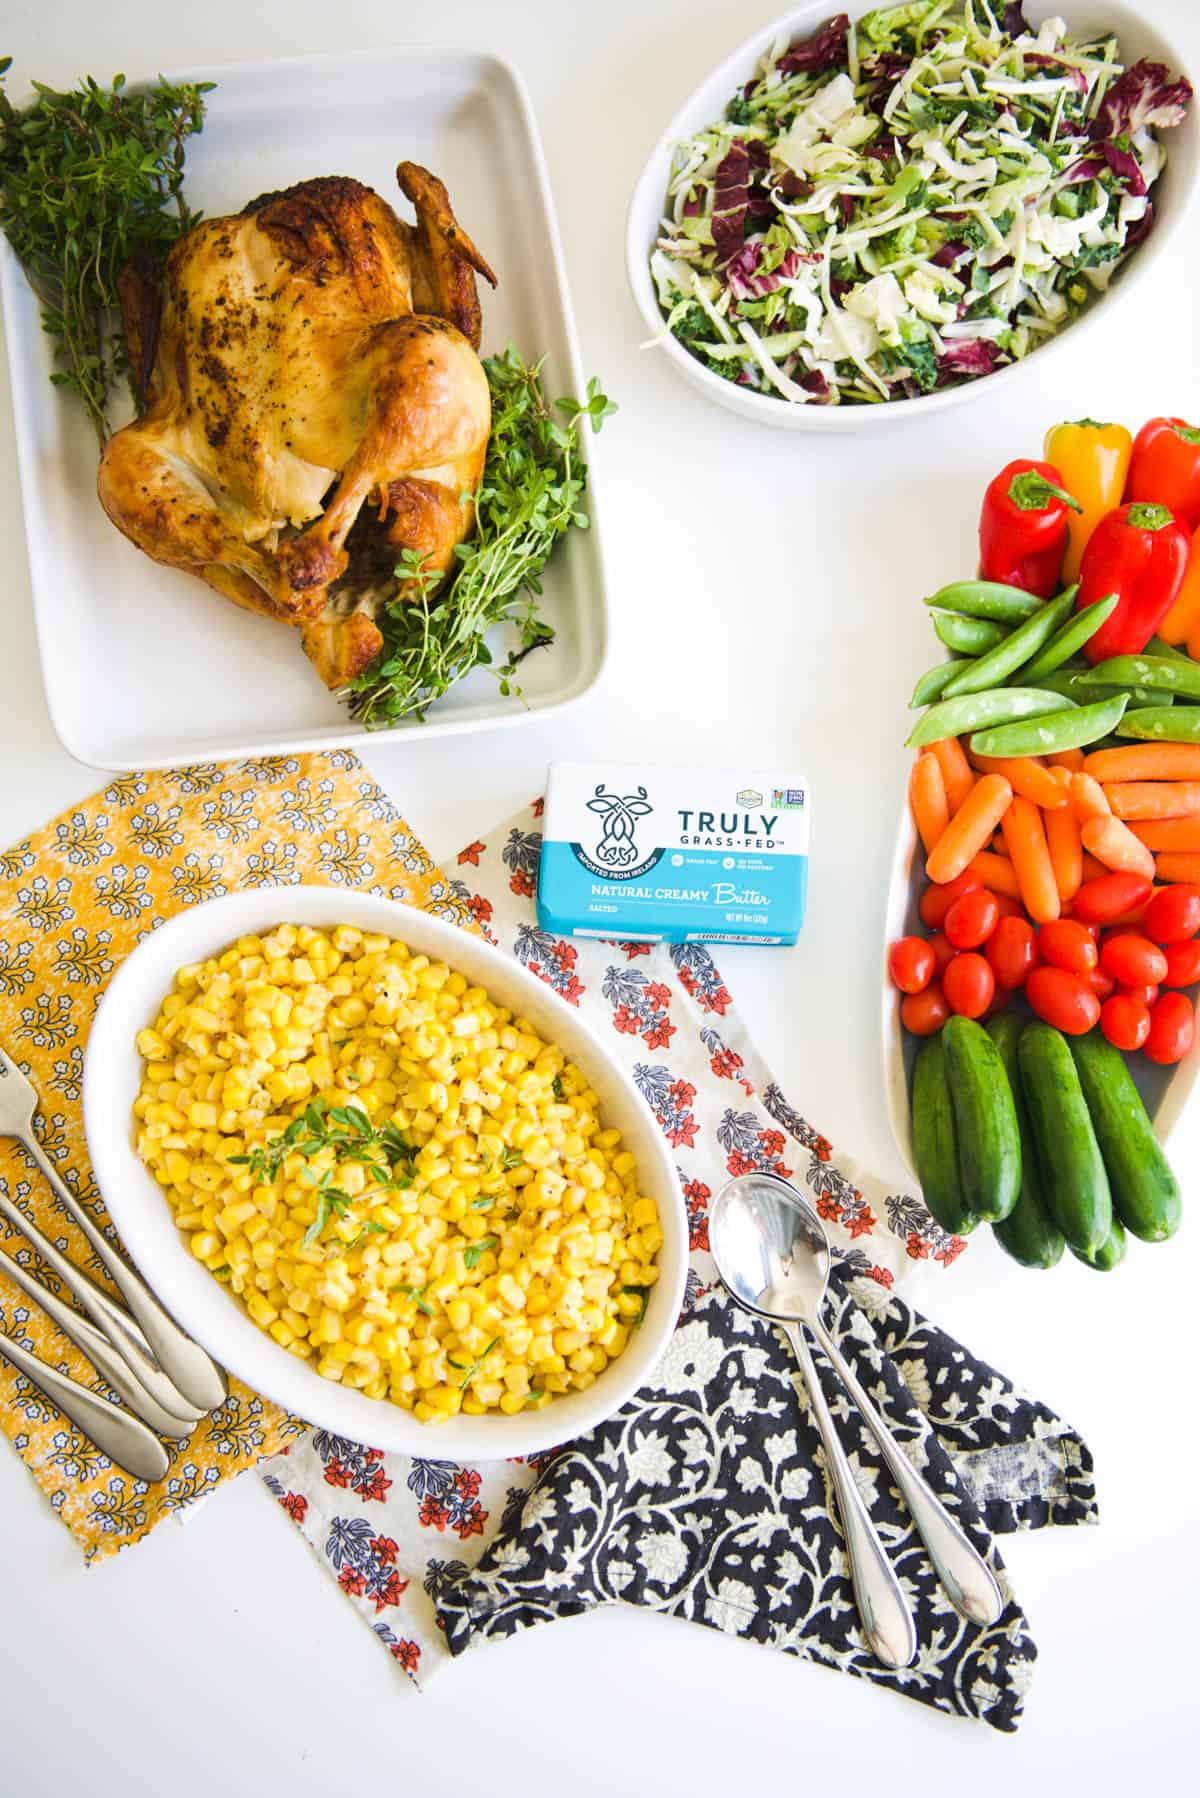 An easy weeknight dinner idea with roast chicken and a corn side dish.